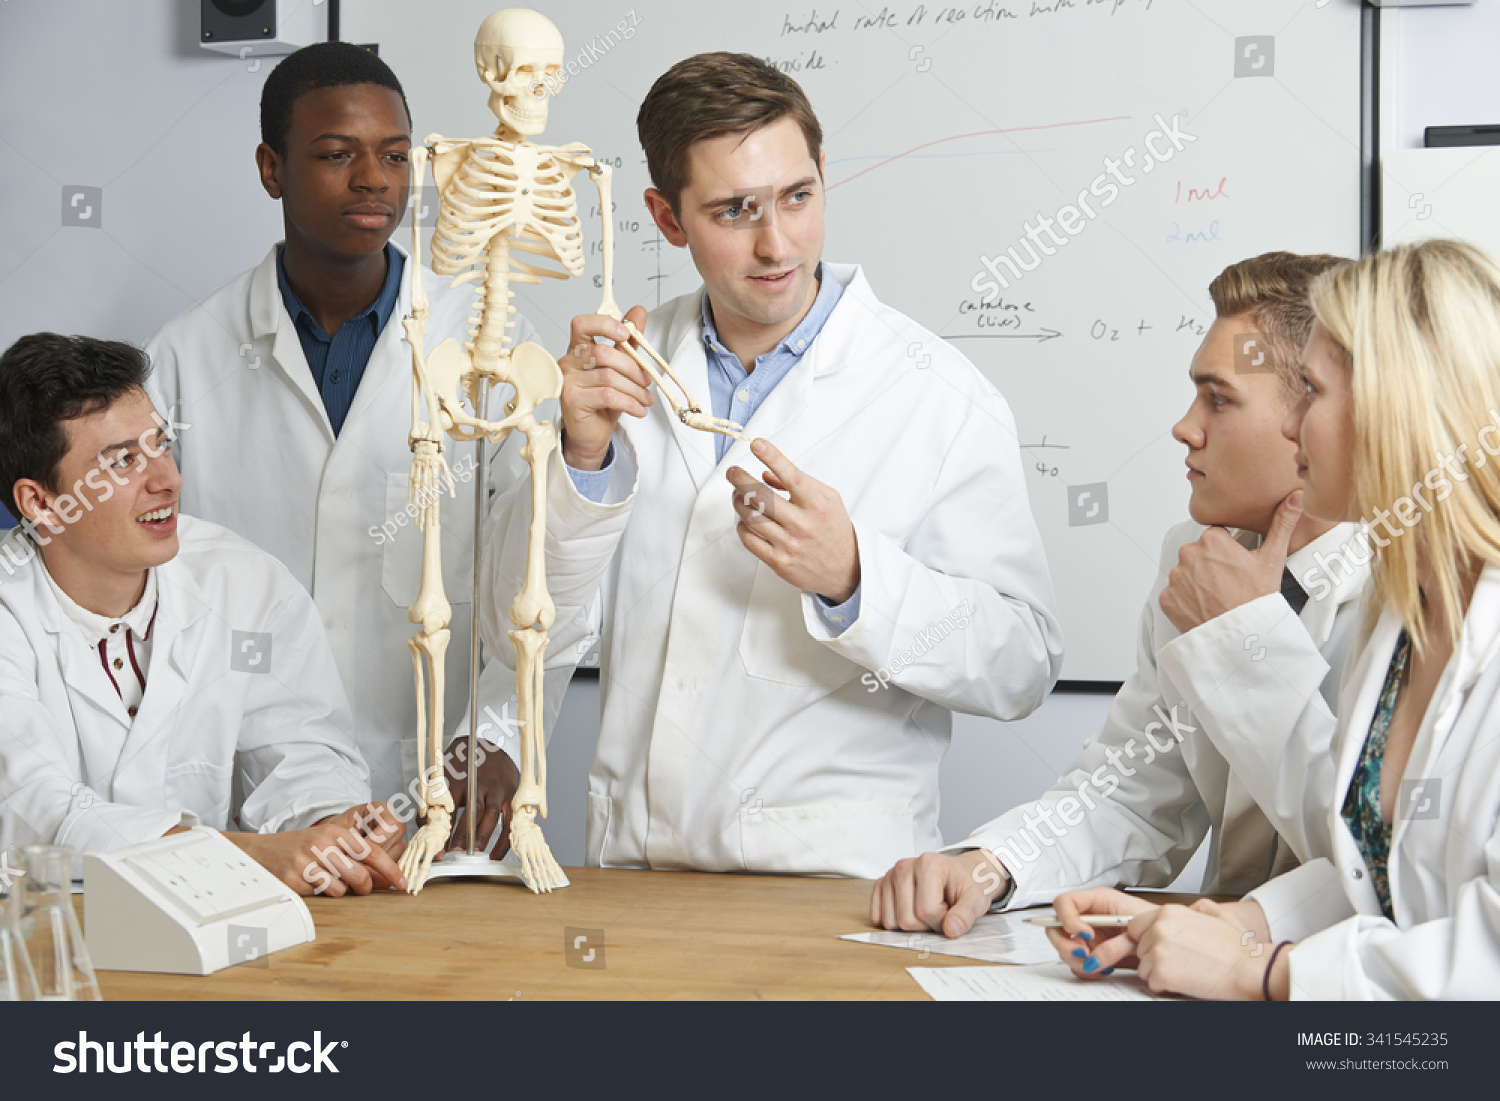 Teacher With Model Of Human Skeleton In Biology Class #341545235